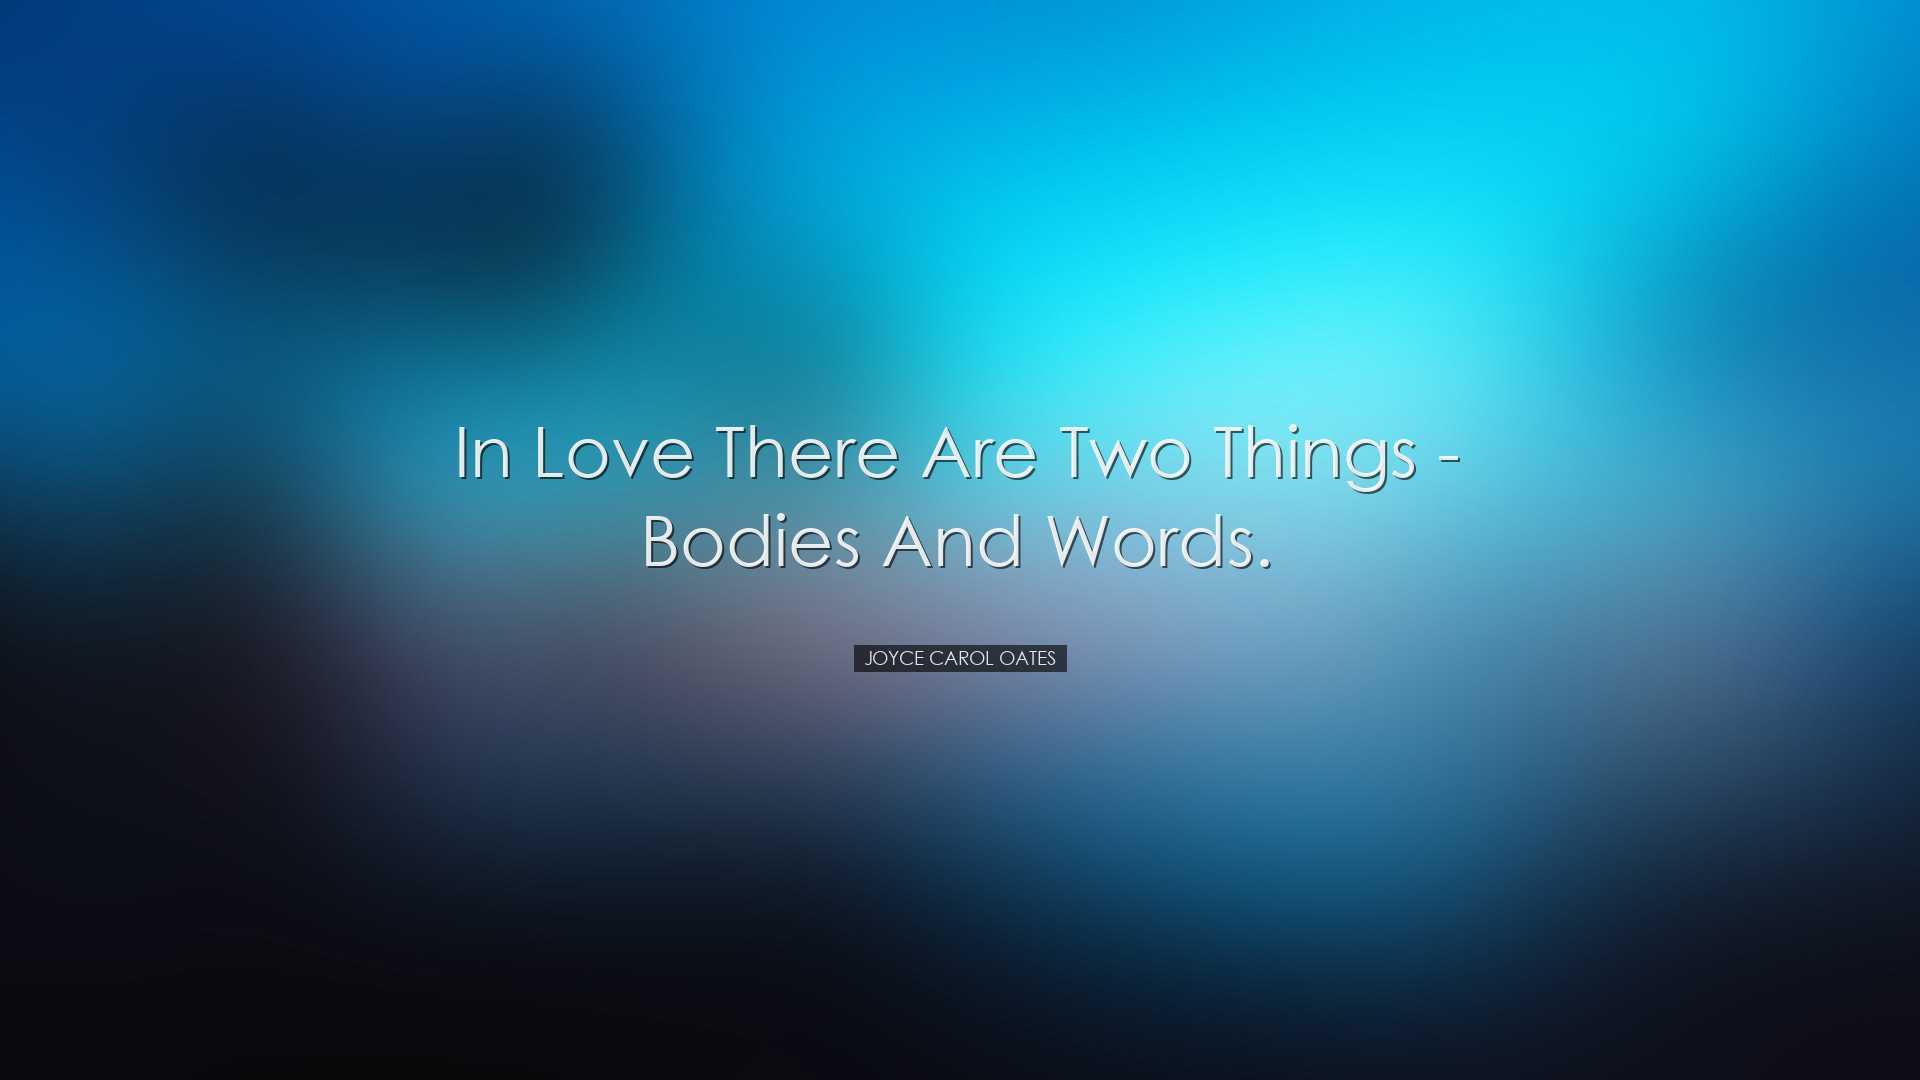 In love there are two things - bodies and words. - Joyce Carol Oat